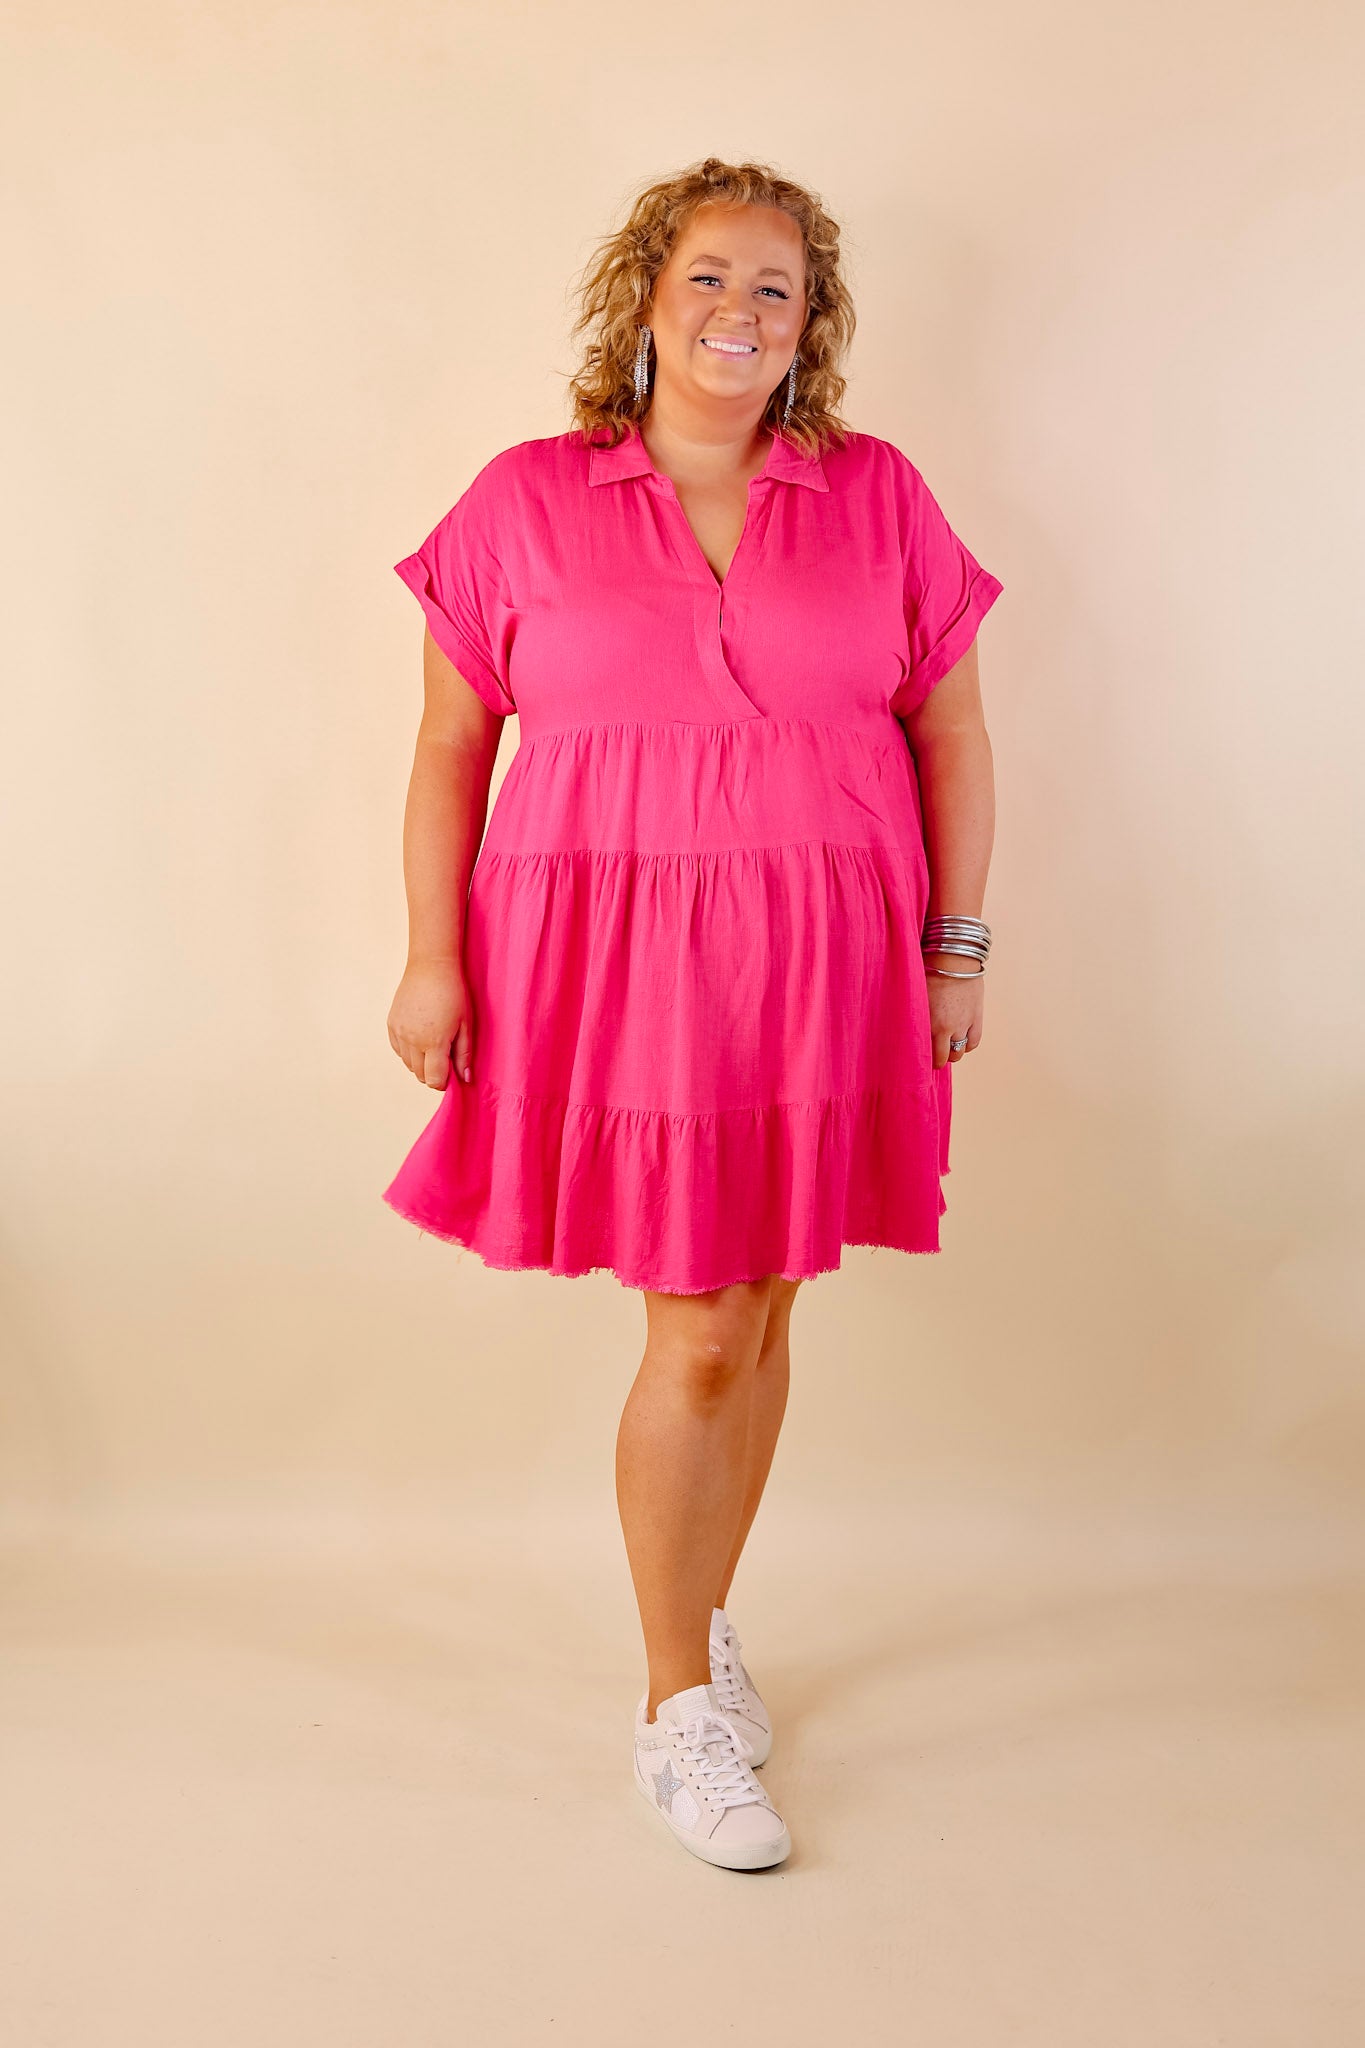 Taos Transitions Ruffle Tiered Collared Dress with Frayed Hem in Hot Pink - Giddy Up Glamour Boutique